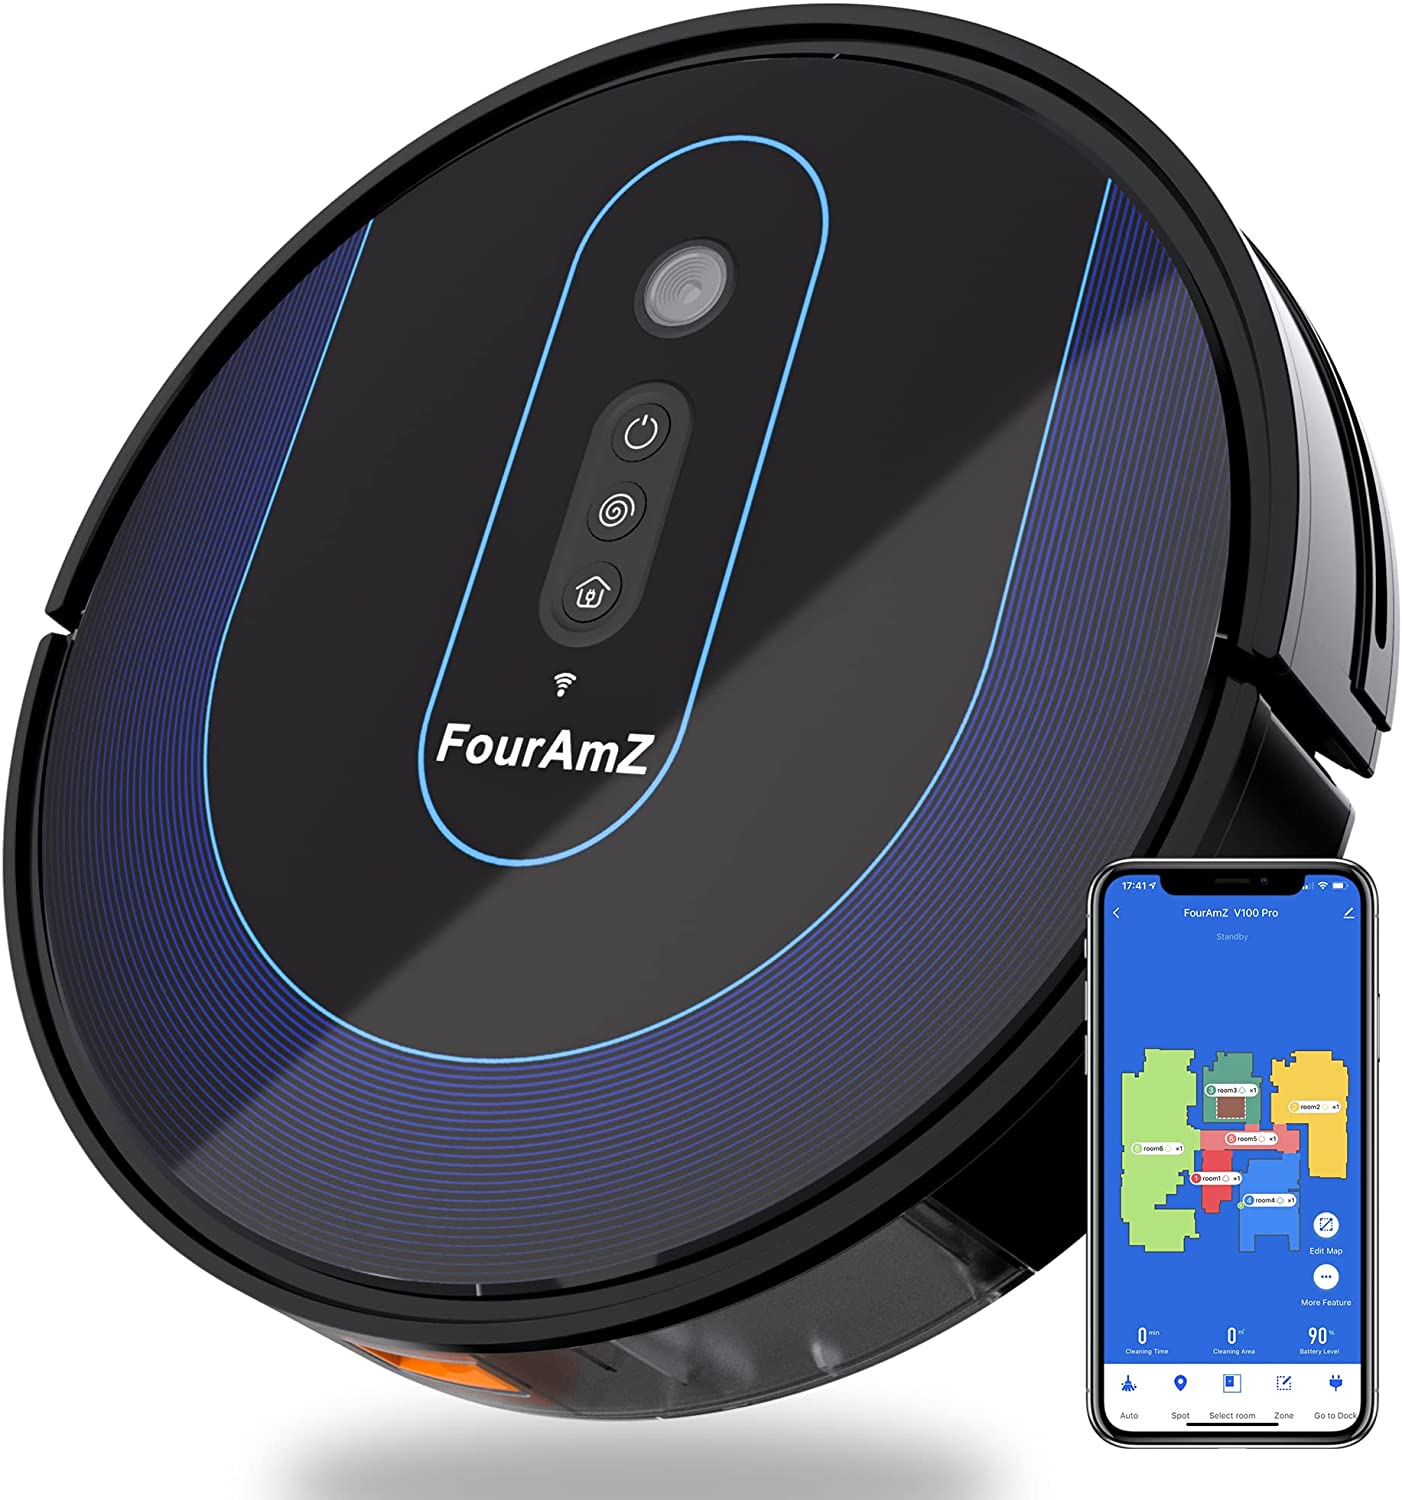 Read more about the article FourAmZ V100 Pro Review